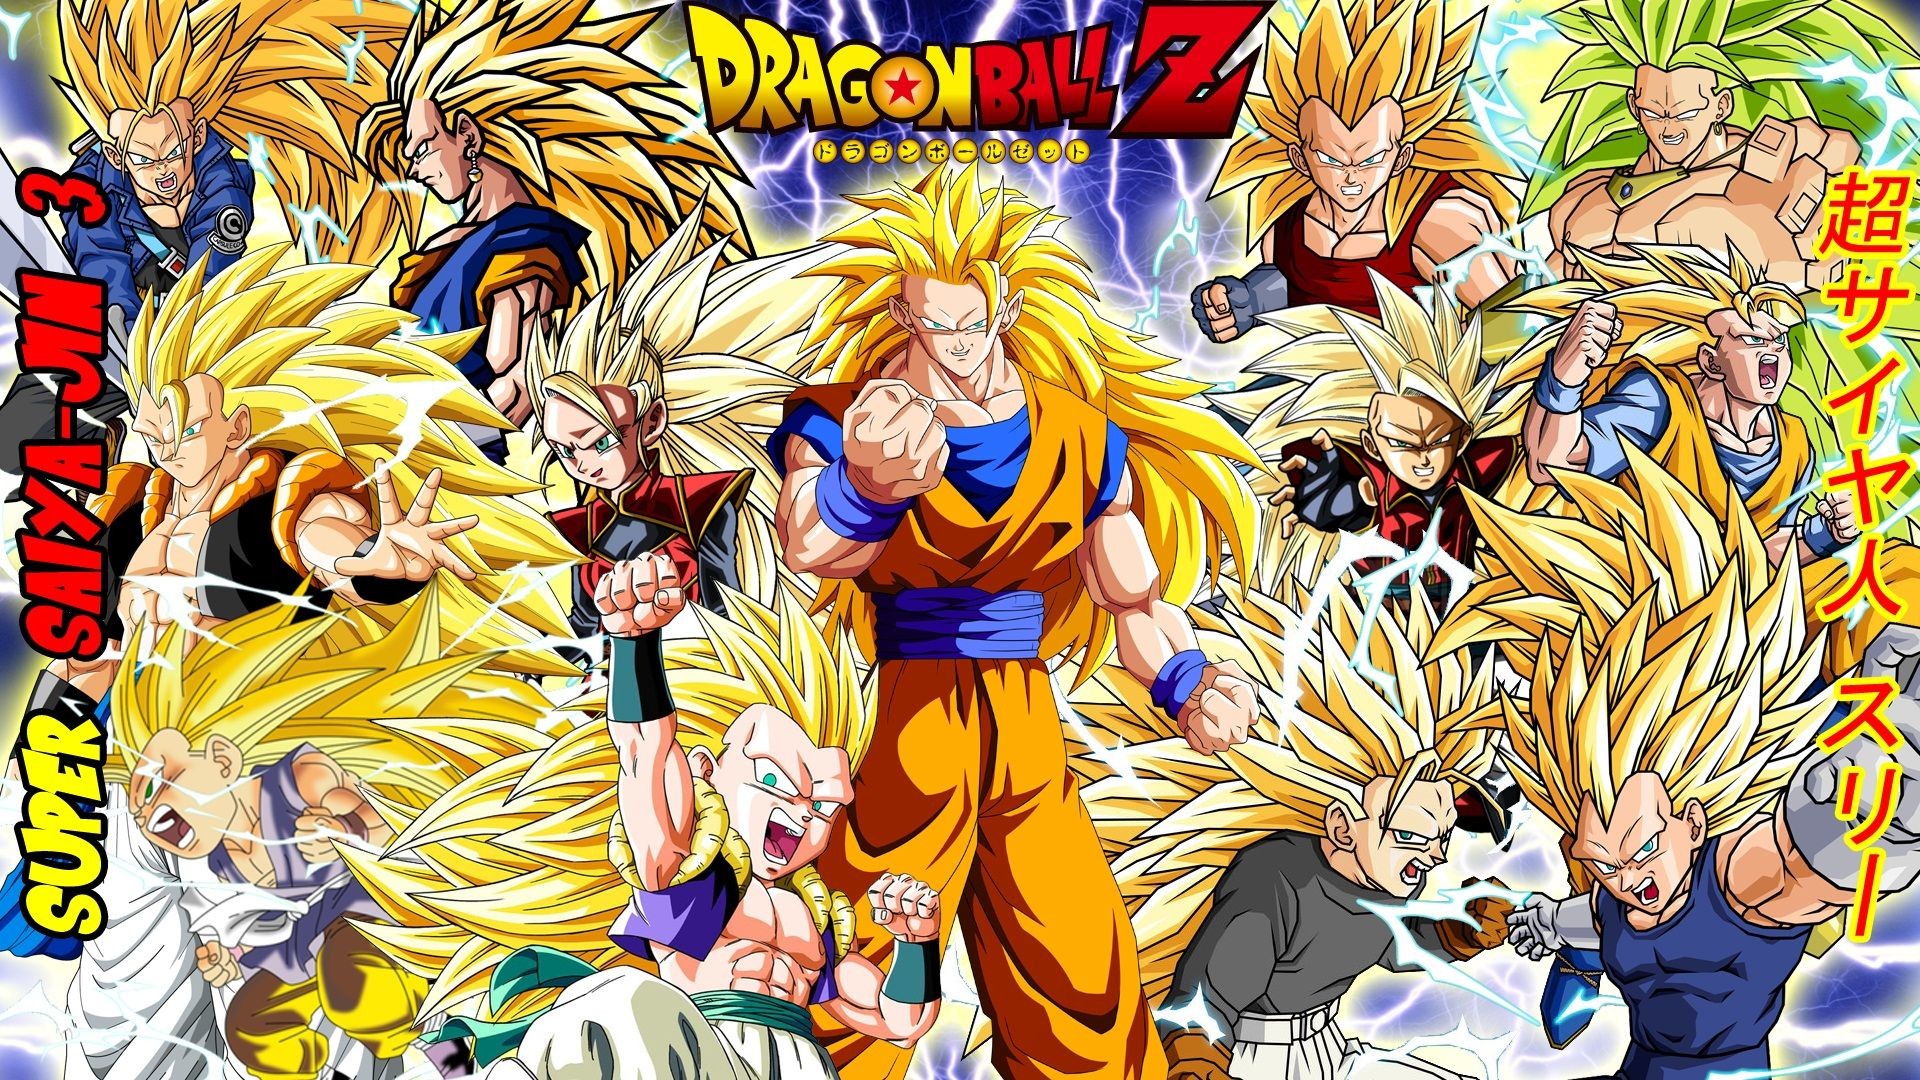 1920x1080 Images Of Dragon Ball